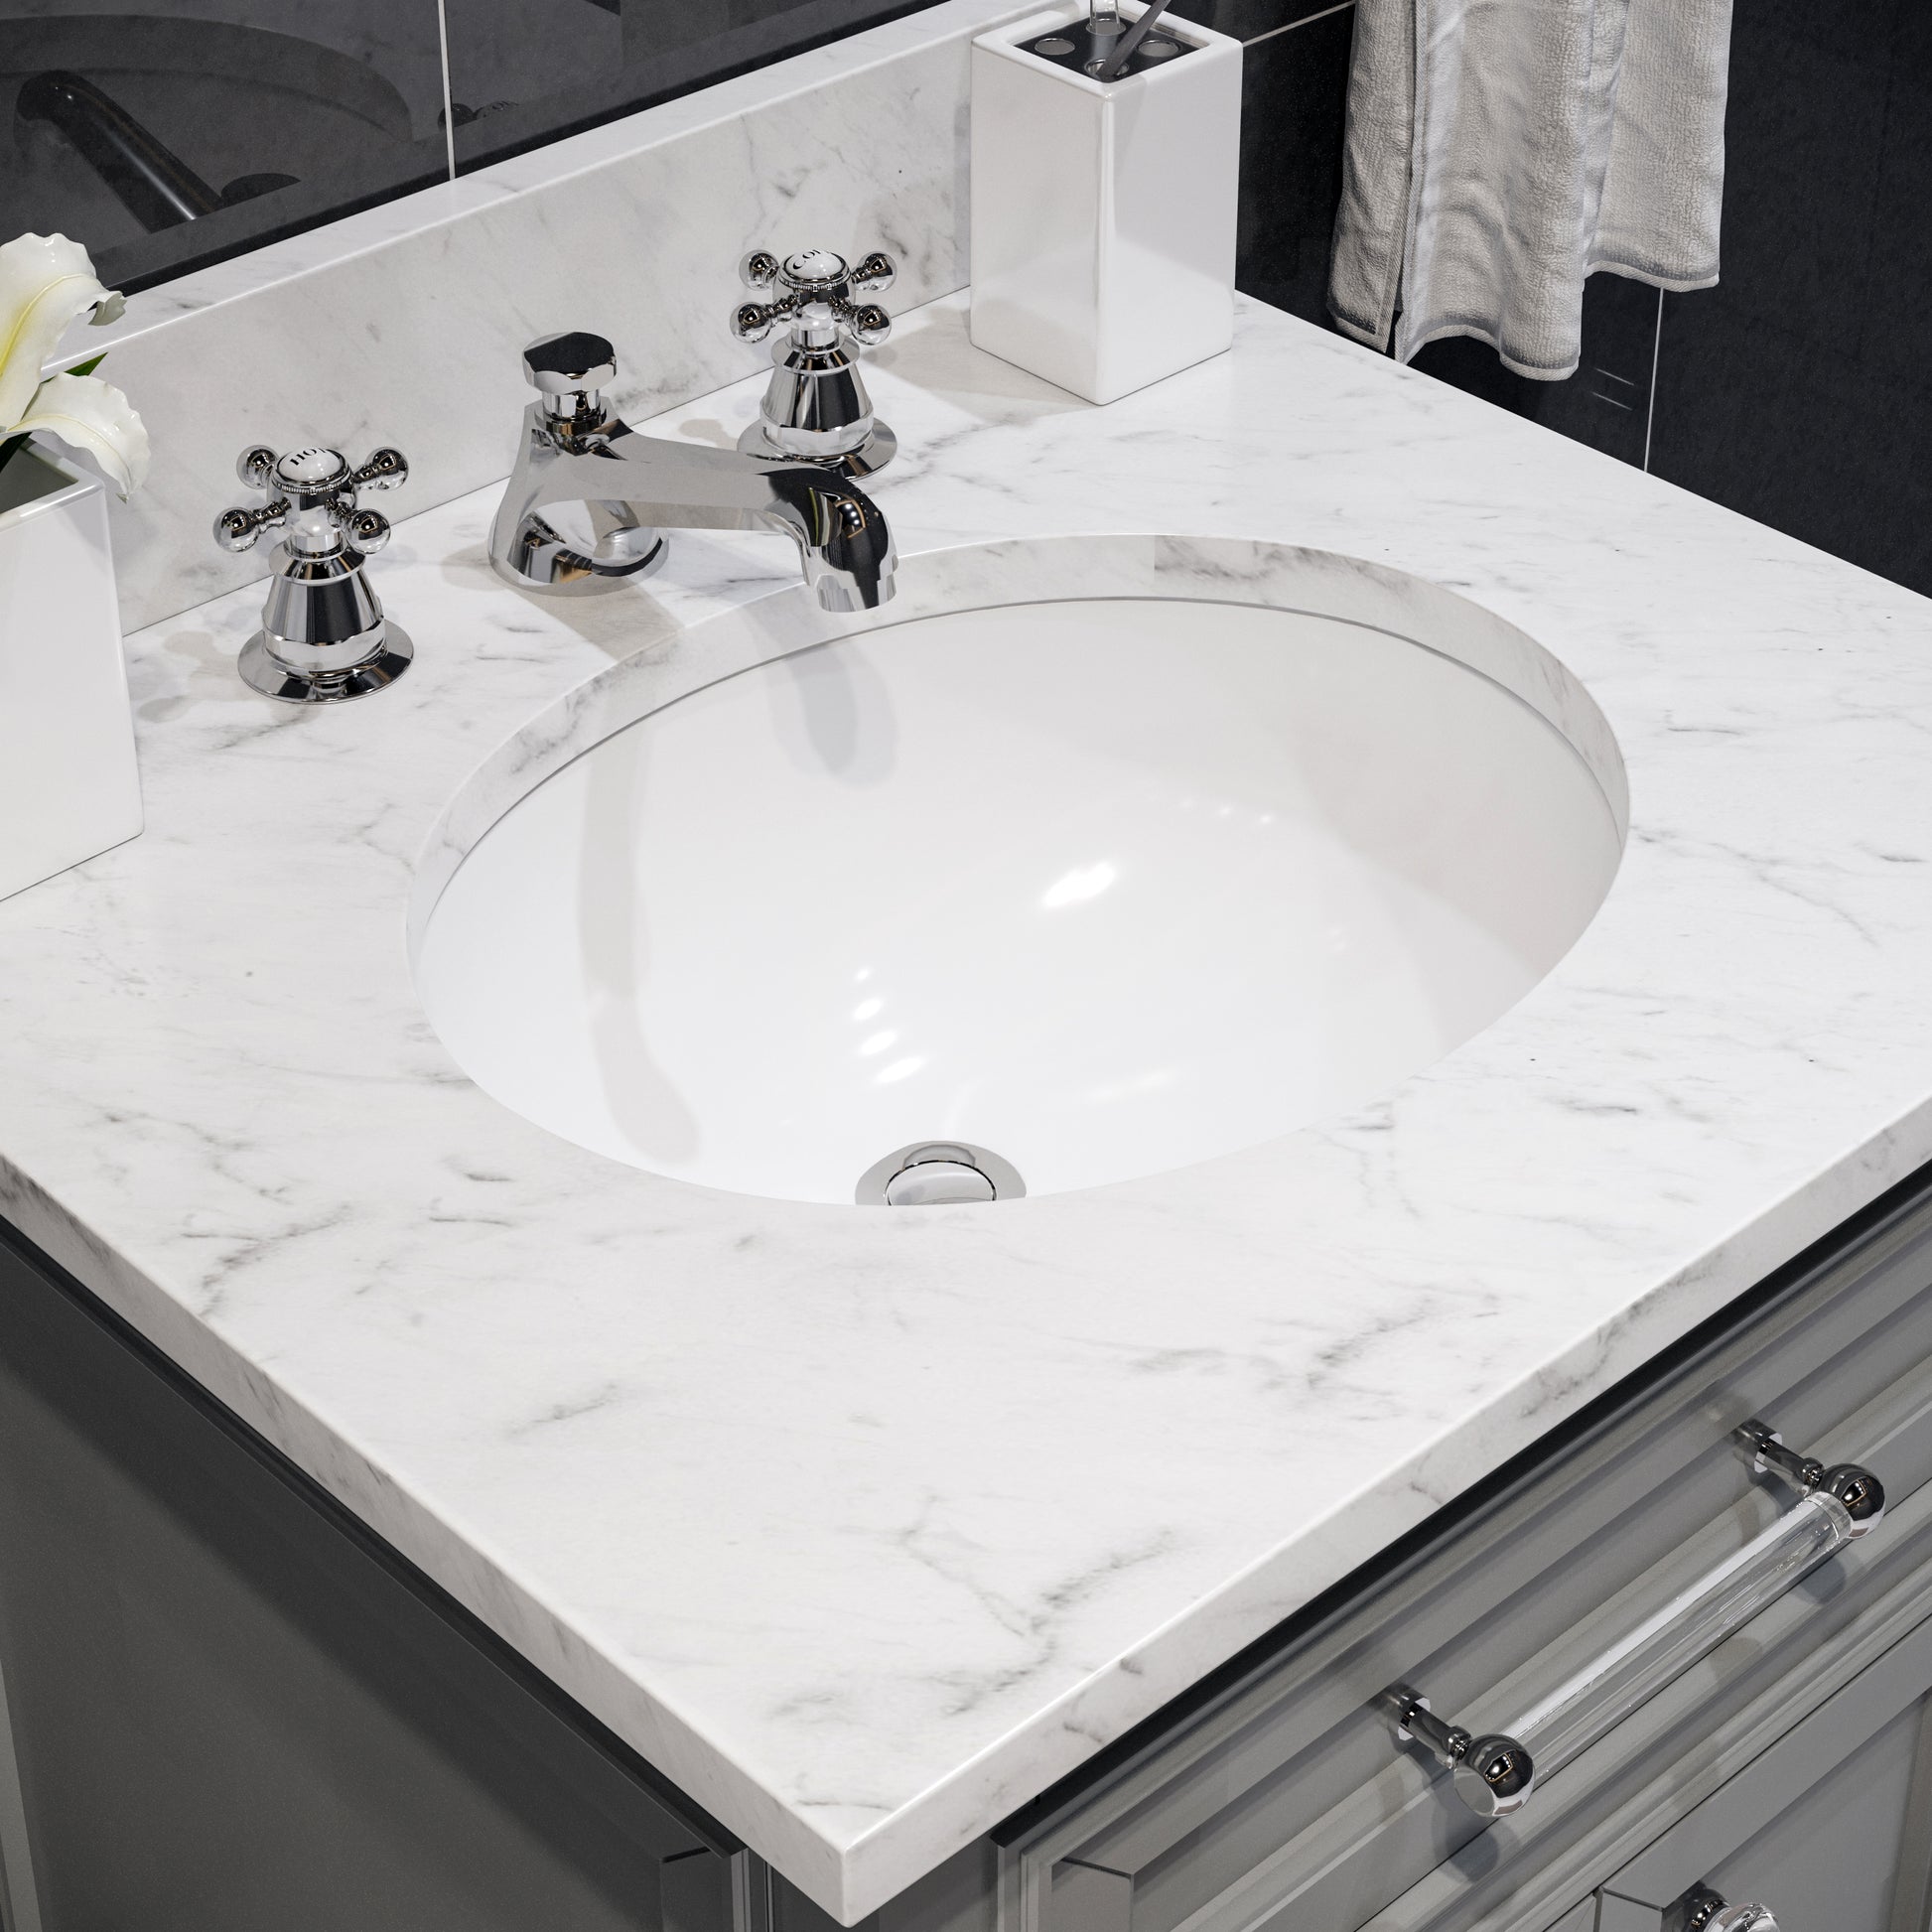 DERBY 24"W x 34"H Cashmere Gray Single-Sink Vanity with Carrara White Marble Countertop + Mirror